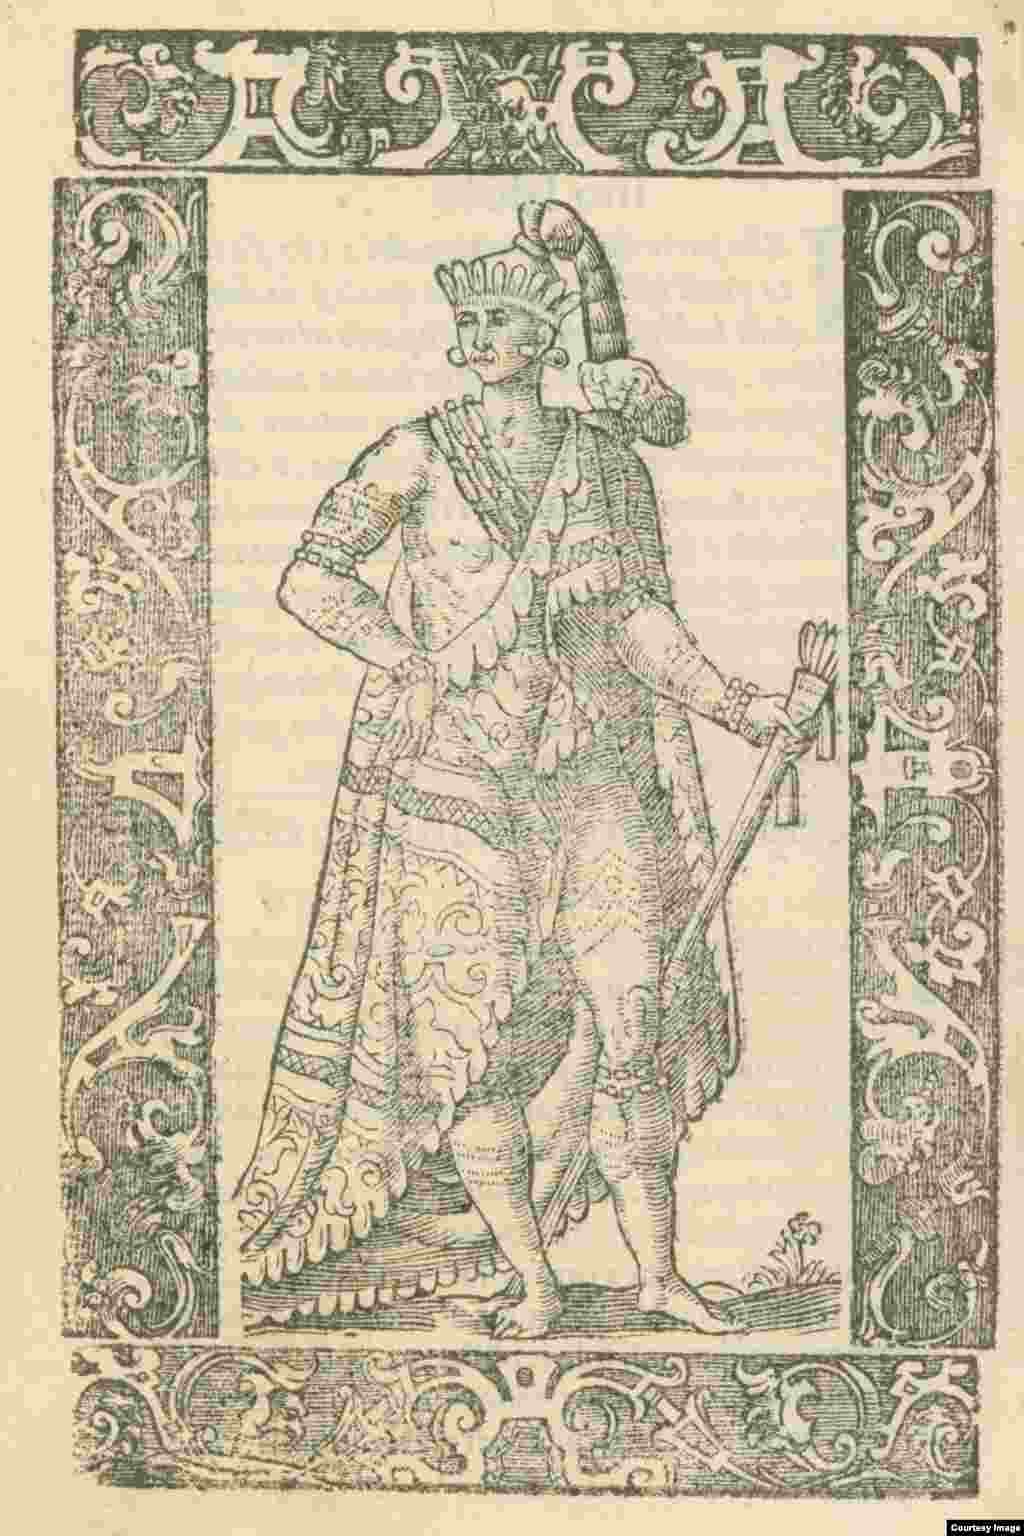 "King of Florida," a 1598 woodcut by Christoph Krieger, shows figure with arm and leg tattoos. ©John Carter Brown Library, Brown University.